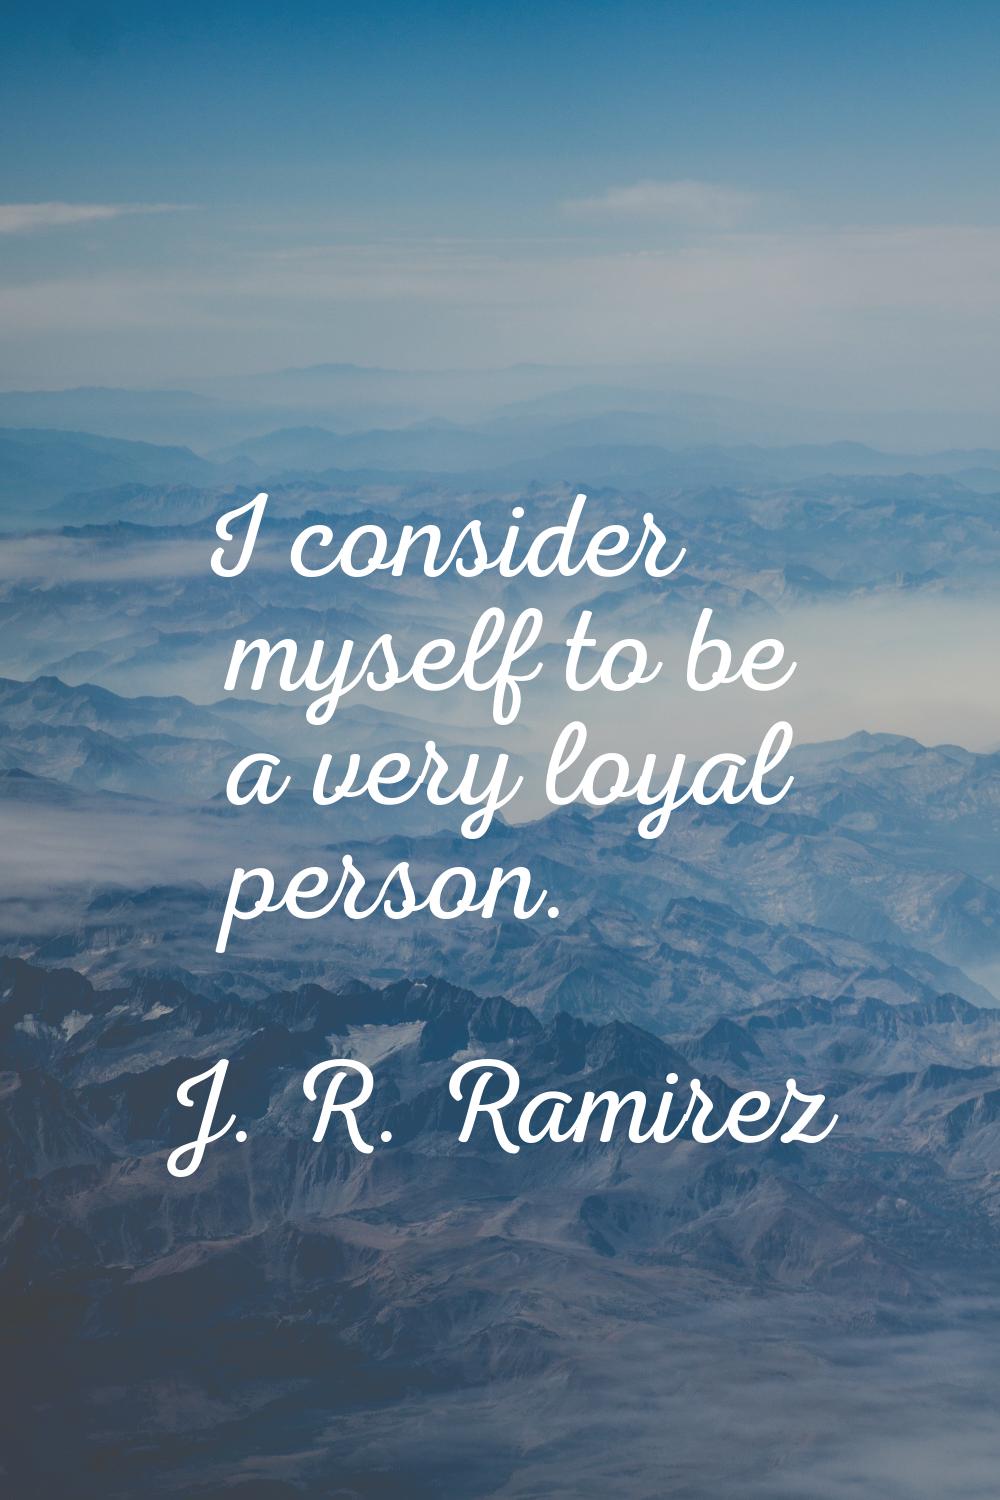 I consider myself to be a very loyal person.